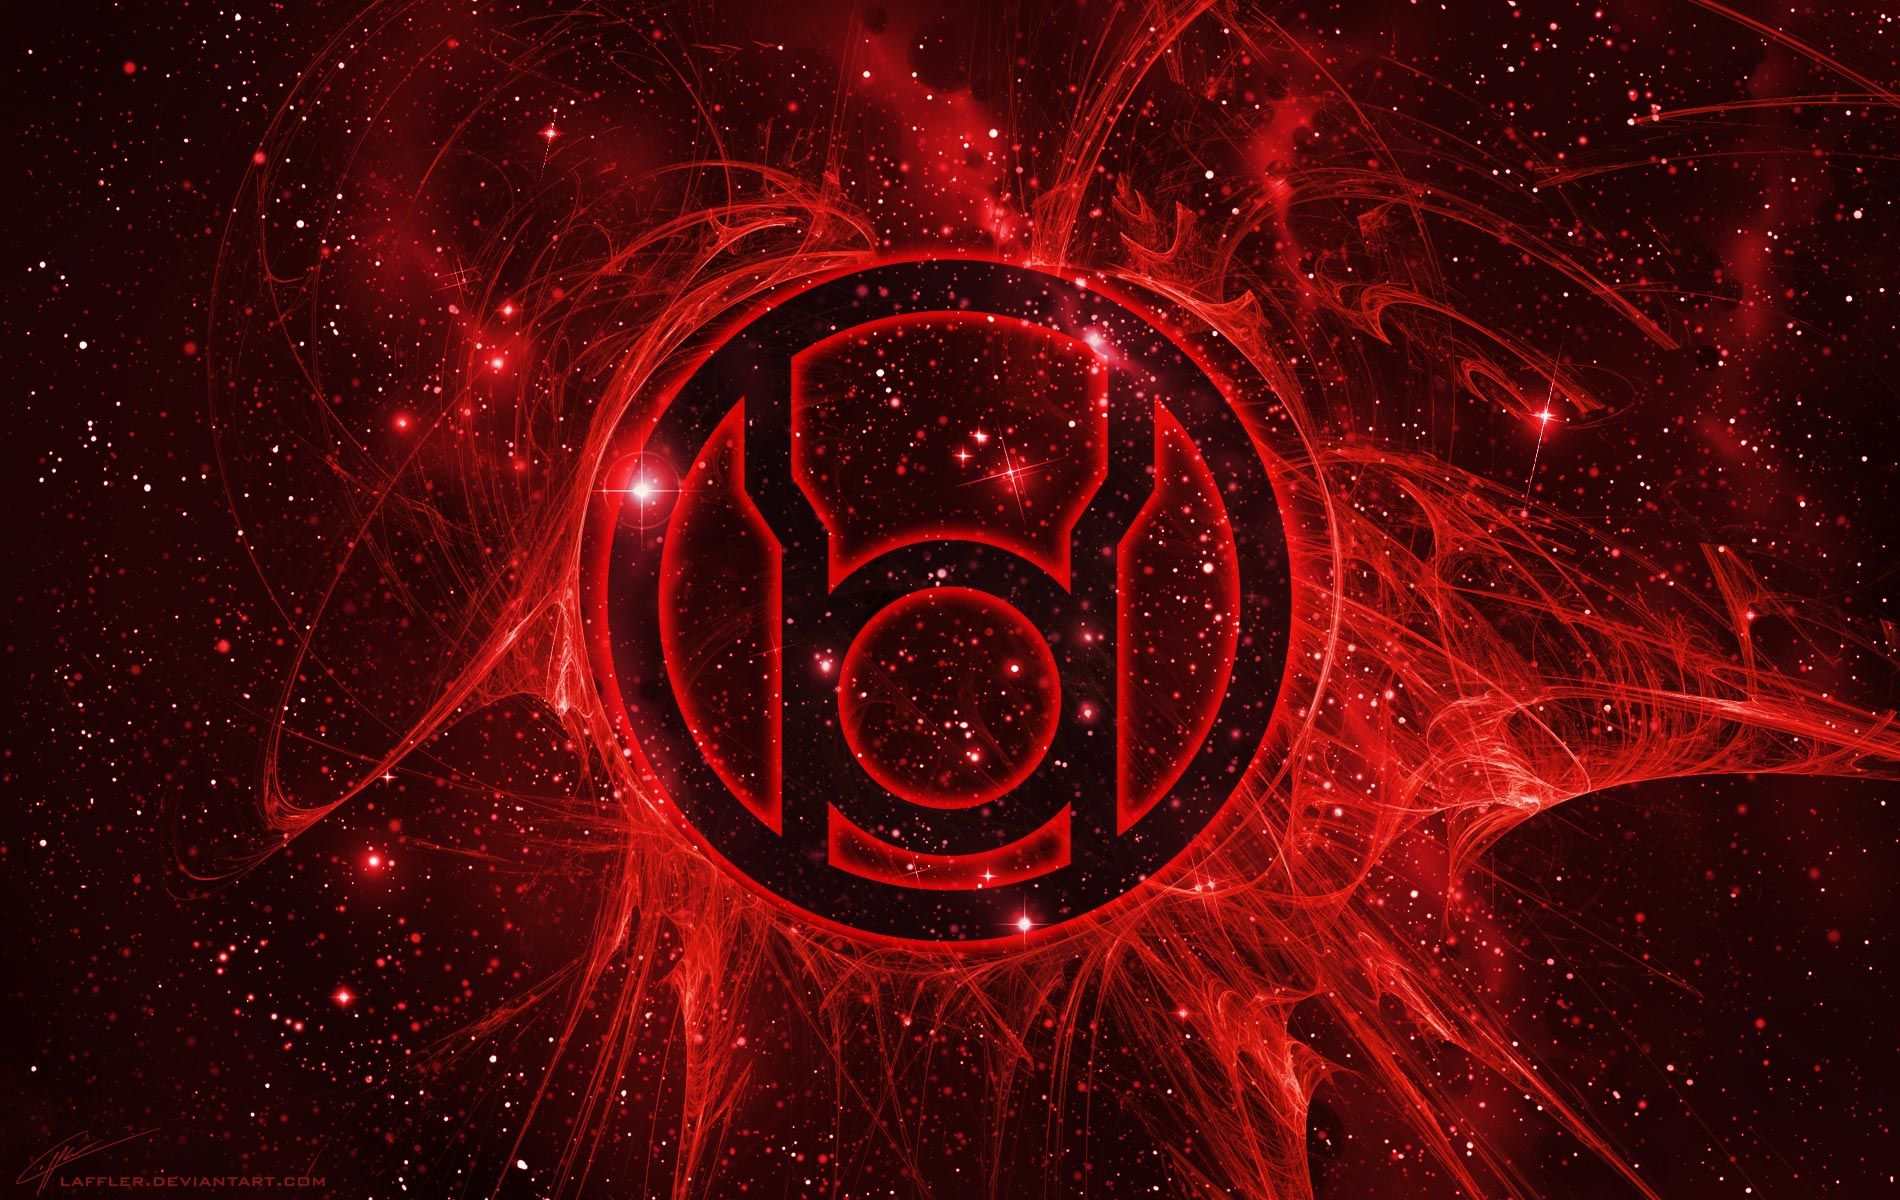 Free download Red Lantern Corps Wallpaper by Laffler [1900x1200] for your Desktop, Mobile & Tablet. Explore Red Lantern Wallpaper. Green Lantern Wallpaper, Green Lantern Oath Wallpaper, Black Lantern Wallpaper